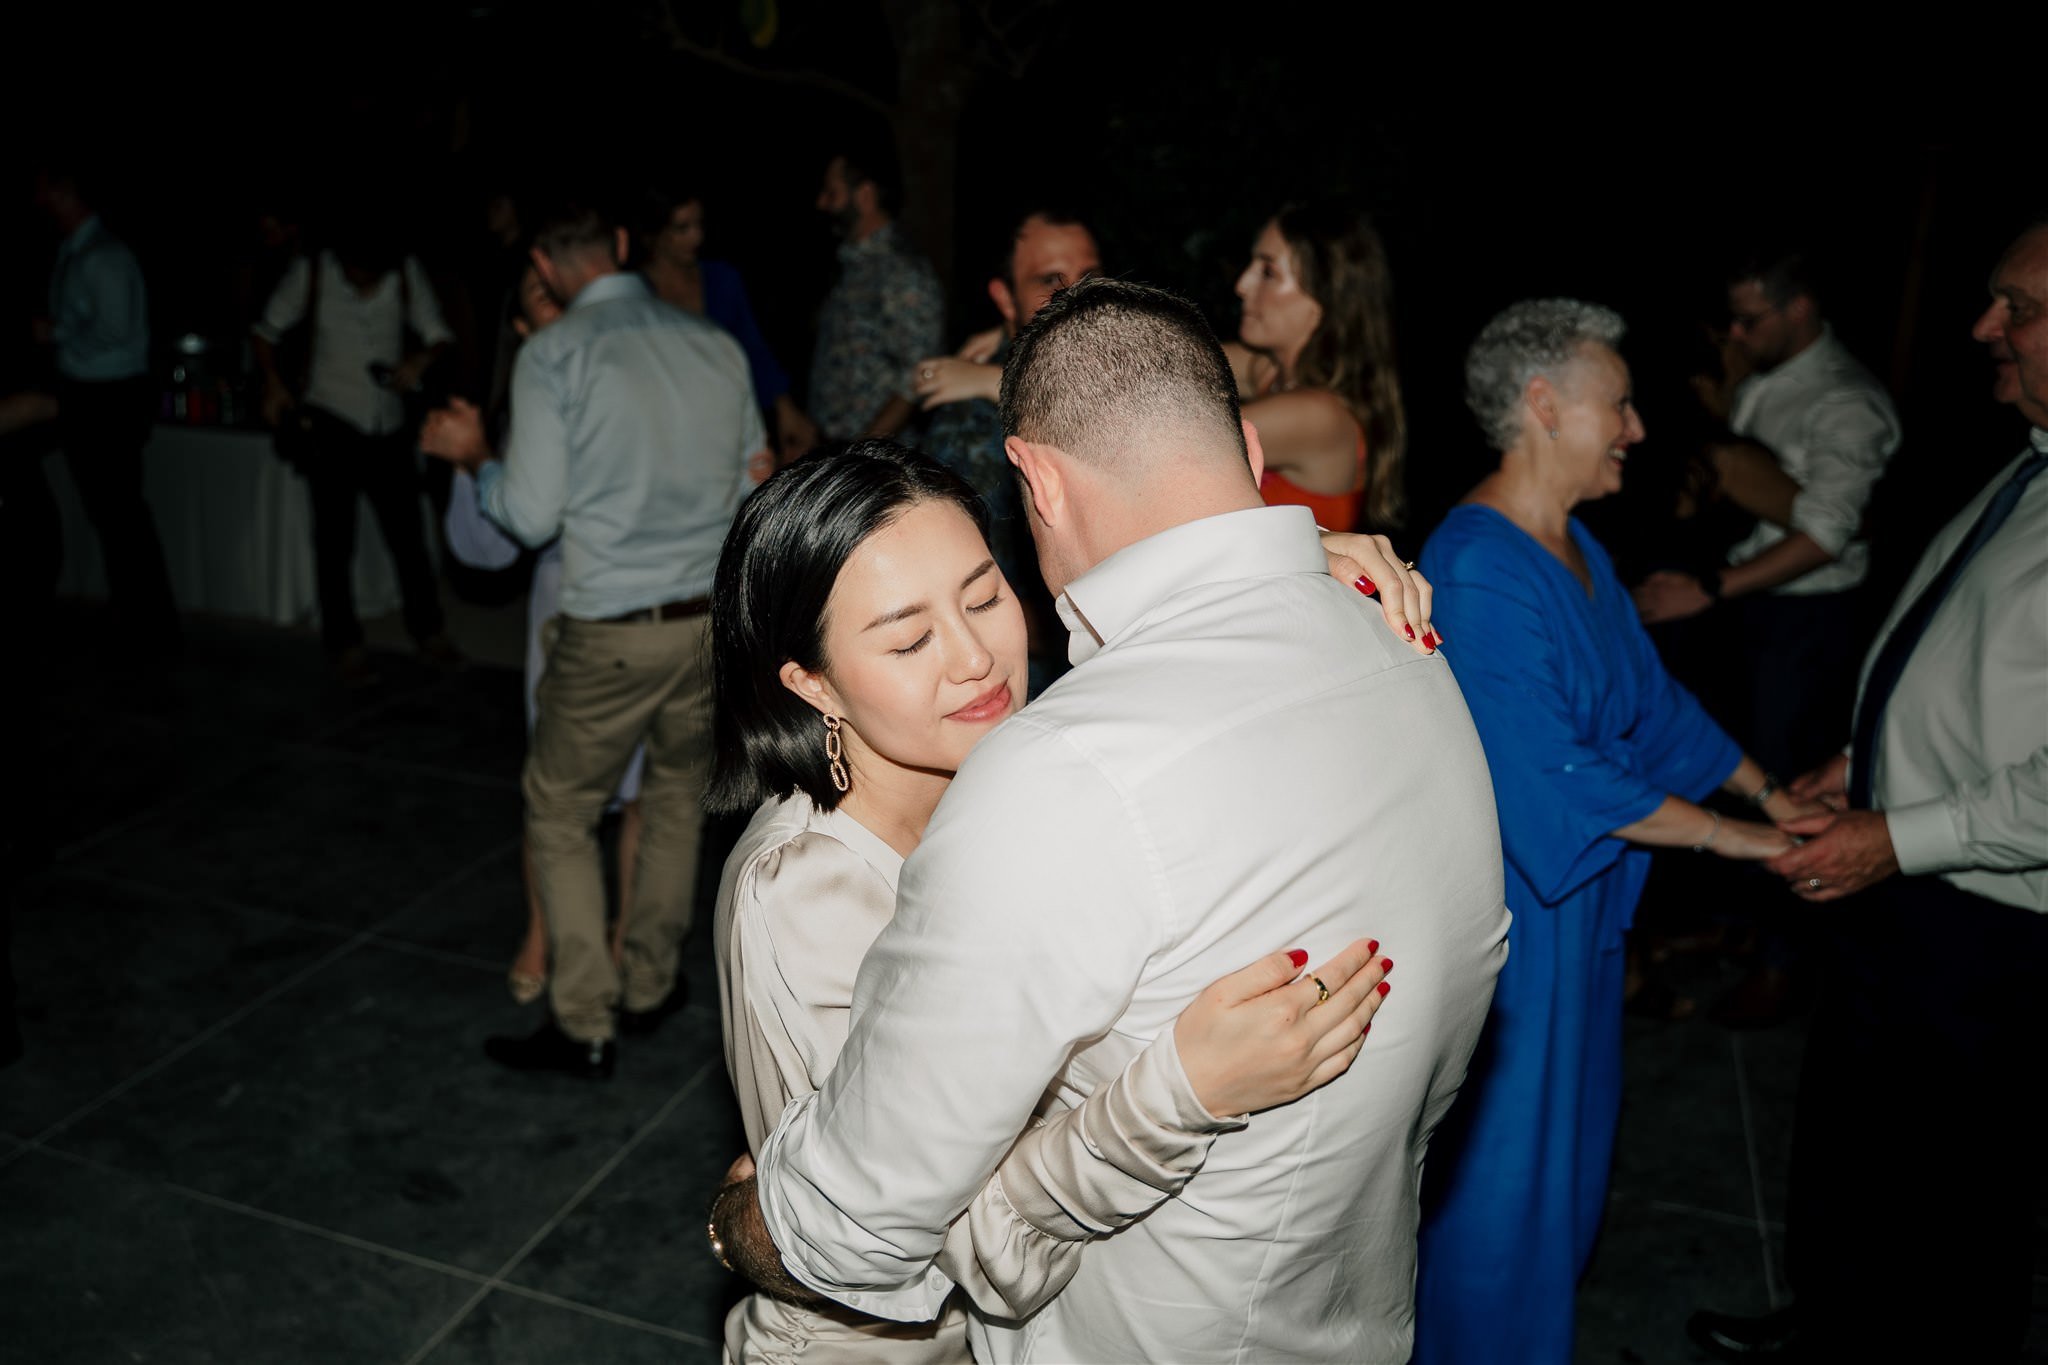 glasshouse-morningside-urban-best-auckland-wedding-venue-central-indoor-photographer-videographer-dear-white-productions-top-industrial-chinese-ceremony-tradition (127).jpg